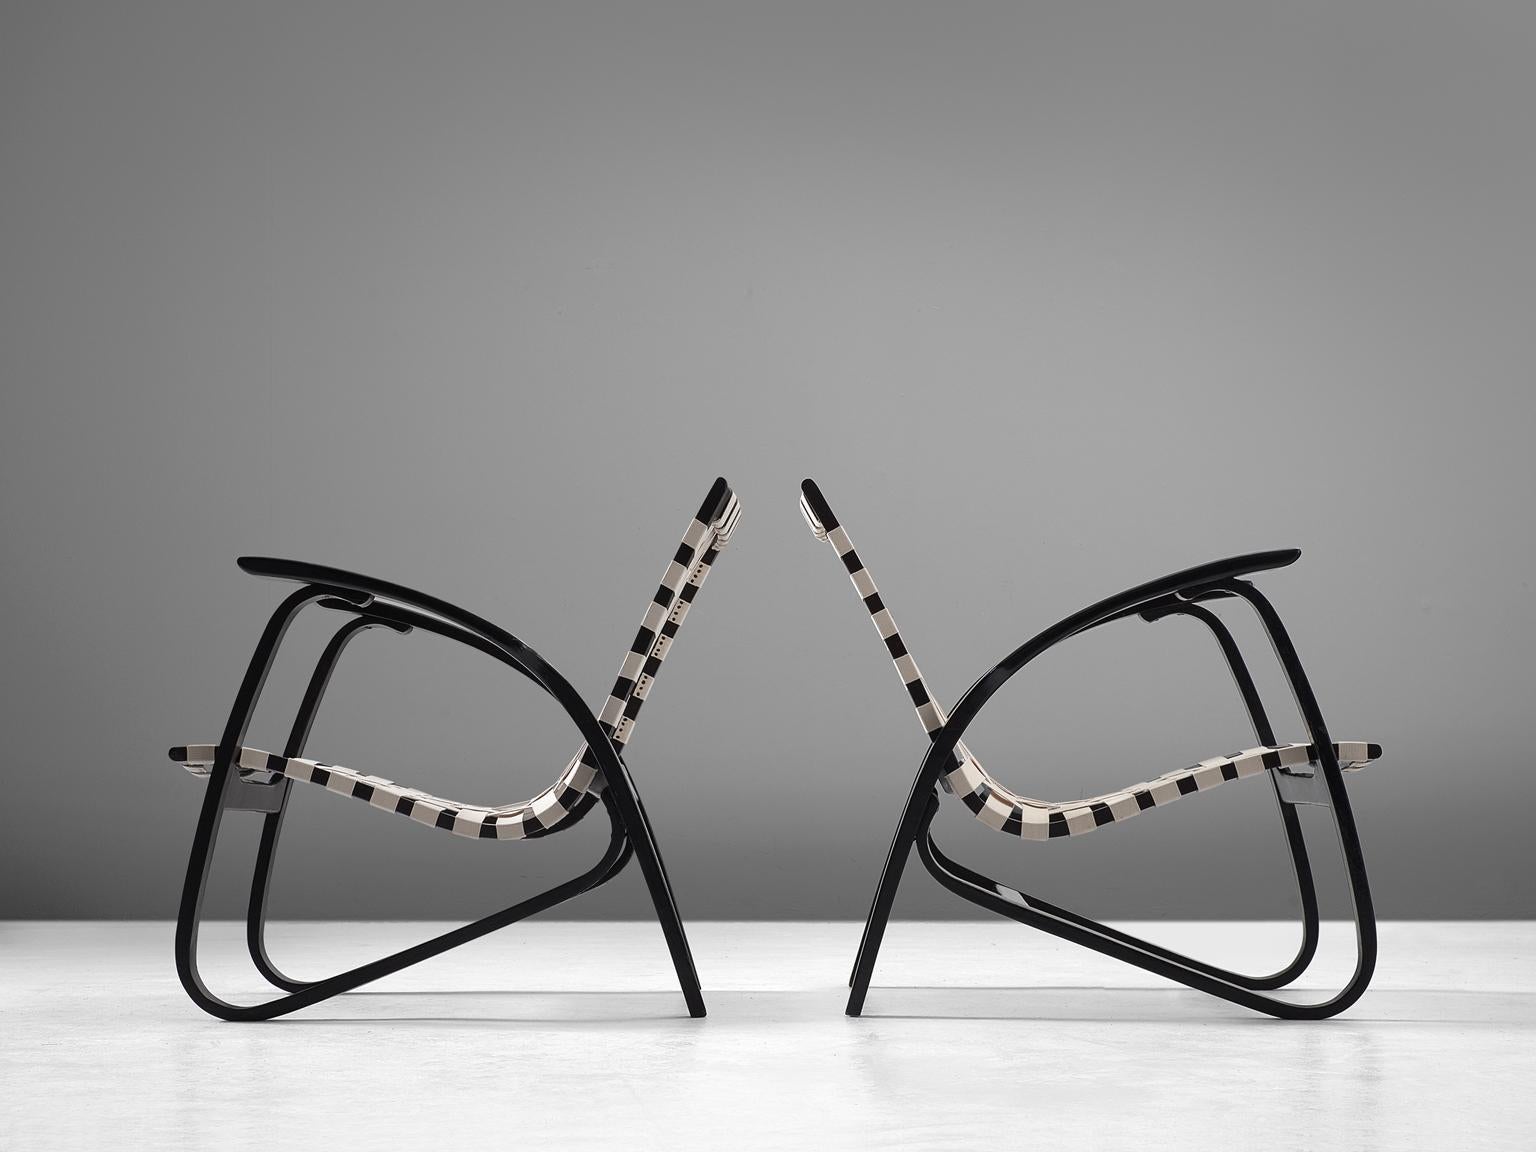 Jan Vanek for UP Zavody, pair of lounge chairs, in wood and canvas, Czech Republic, 1930s. 

Stunning pair of dynamic armchairs designed by Czech architect Jan Vanek, who was working in the same period and style as Jindrich Halabala. These chairs